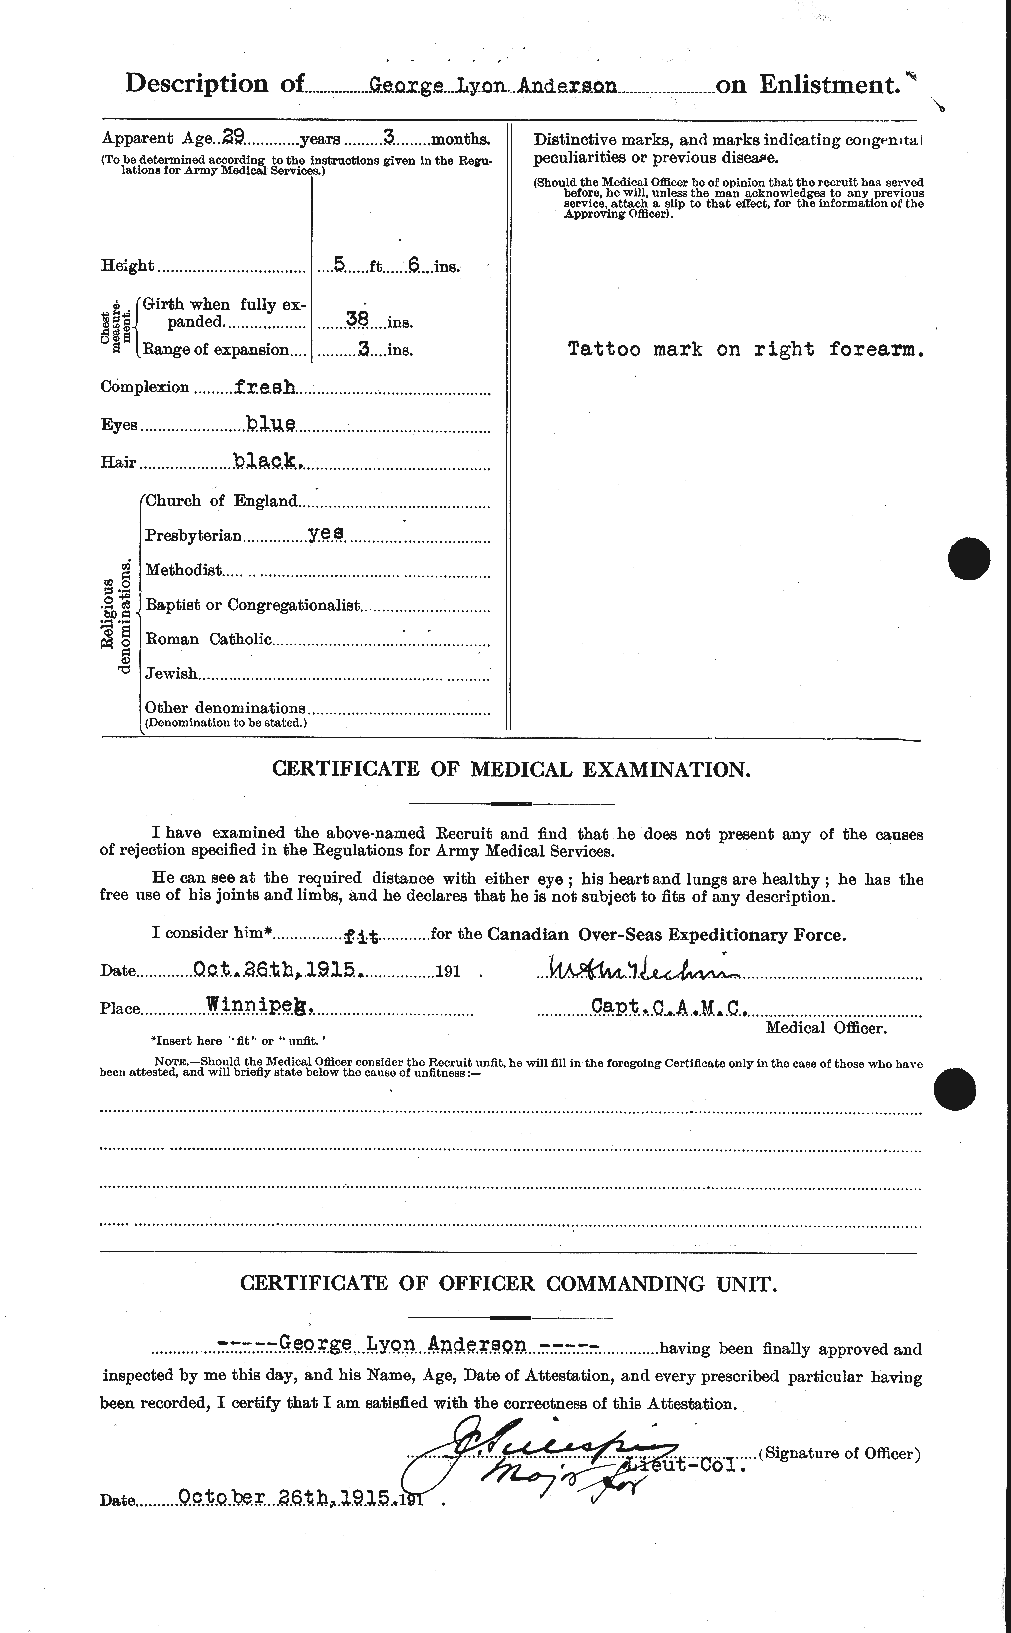 Personnel Records of the First World War - CEF 209711b